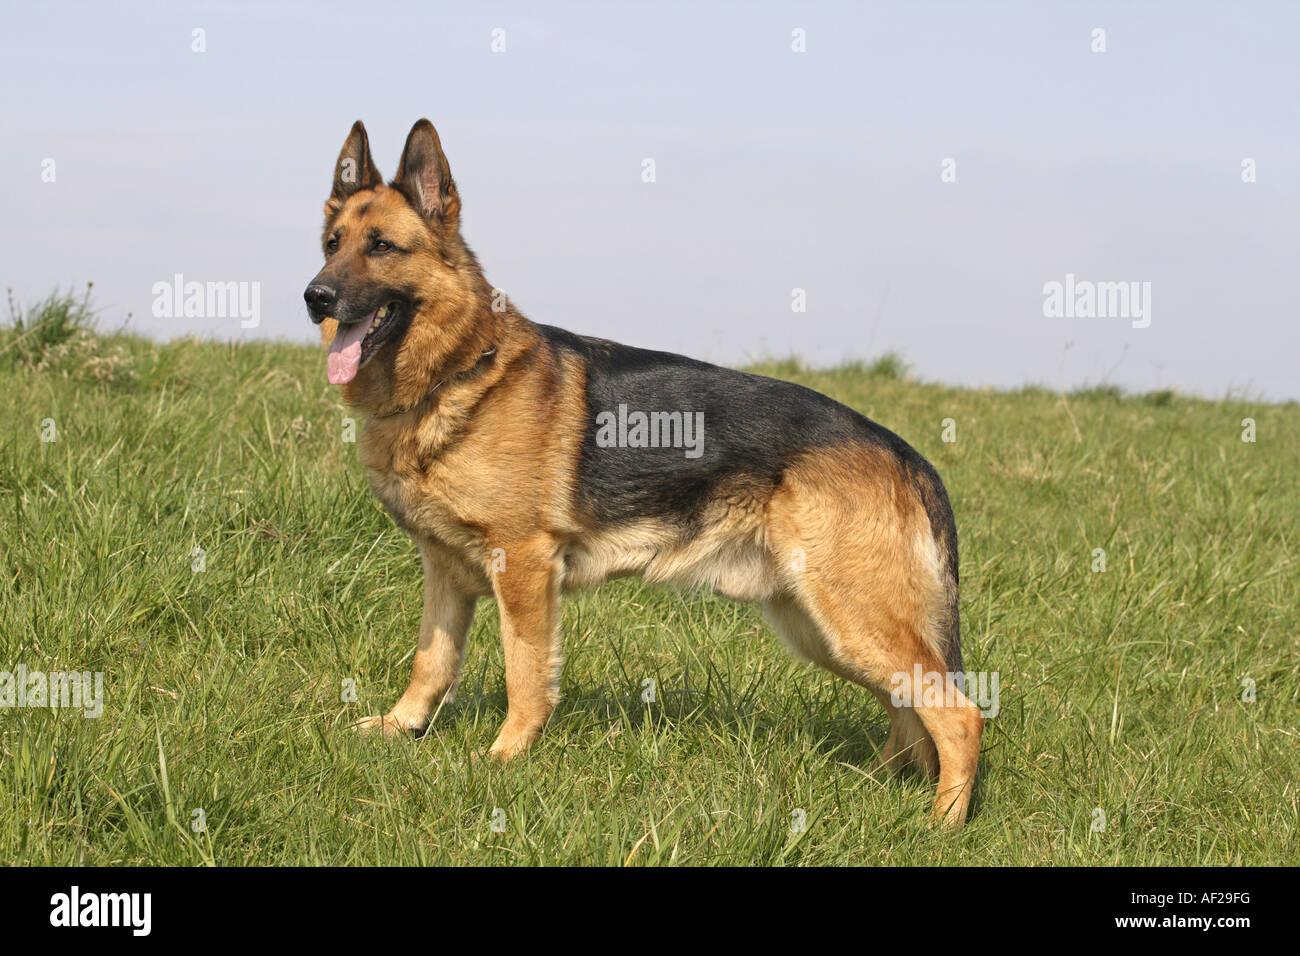 German Shepherd Dog (Canis lupus f. familiaris), standing in a meadow Stock Photo